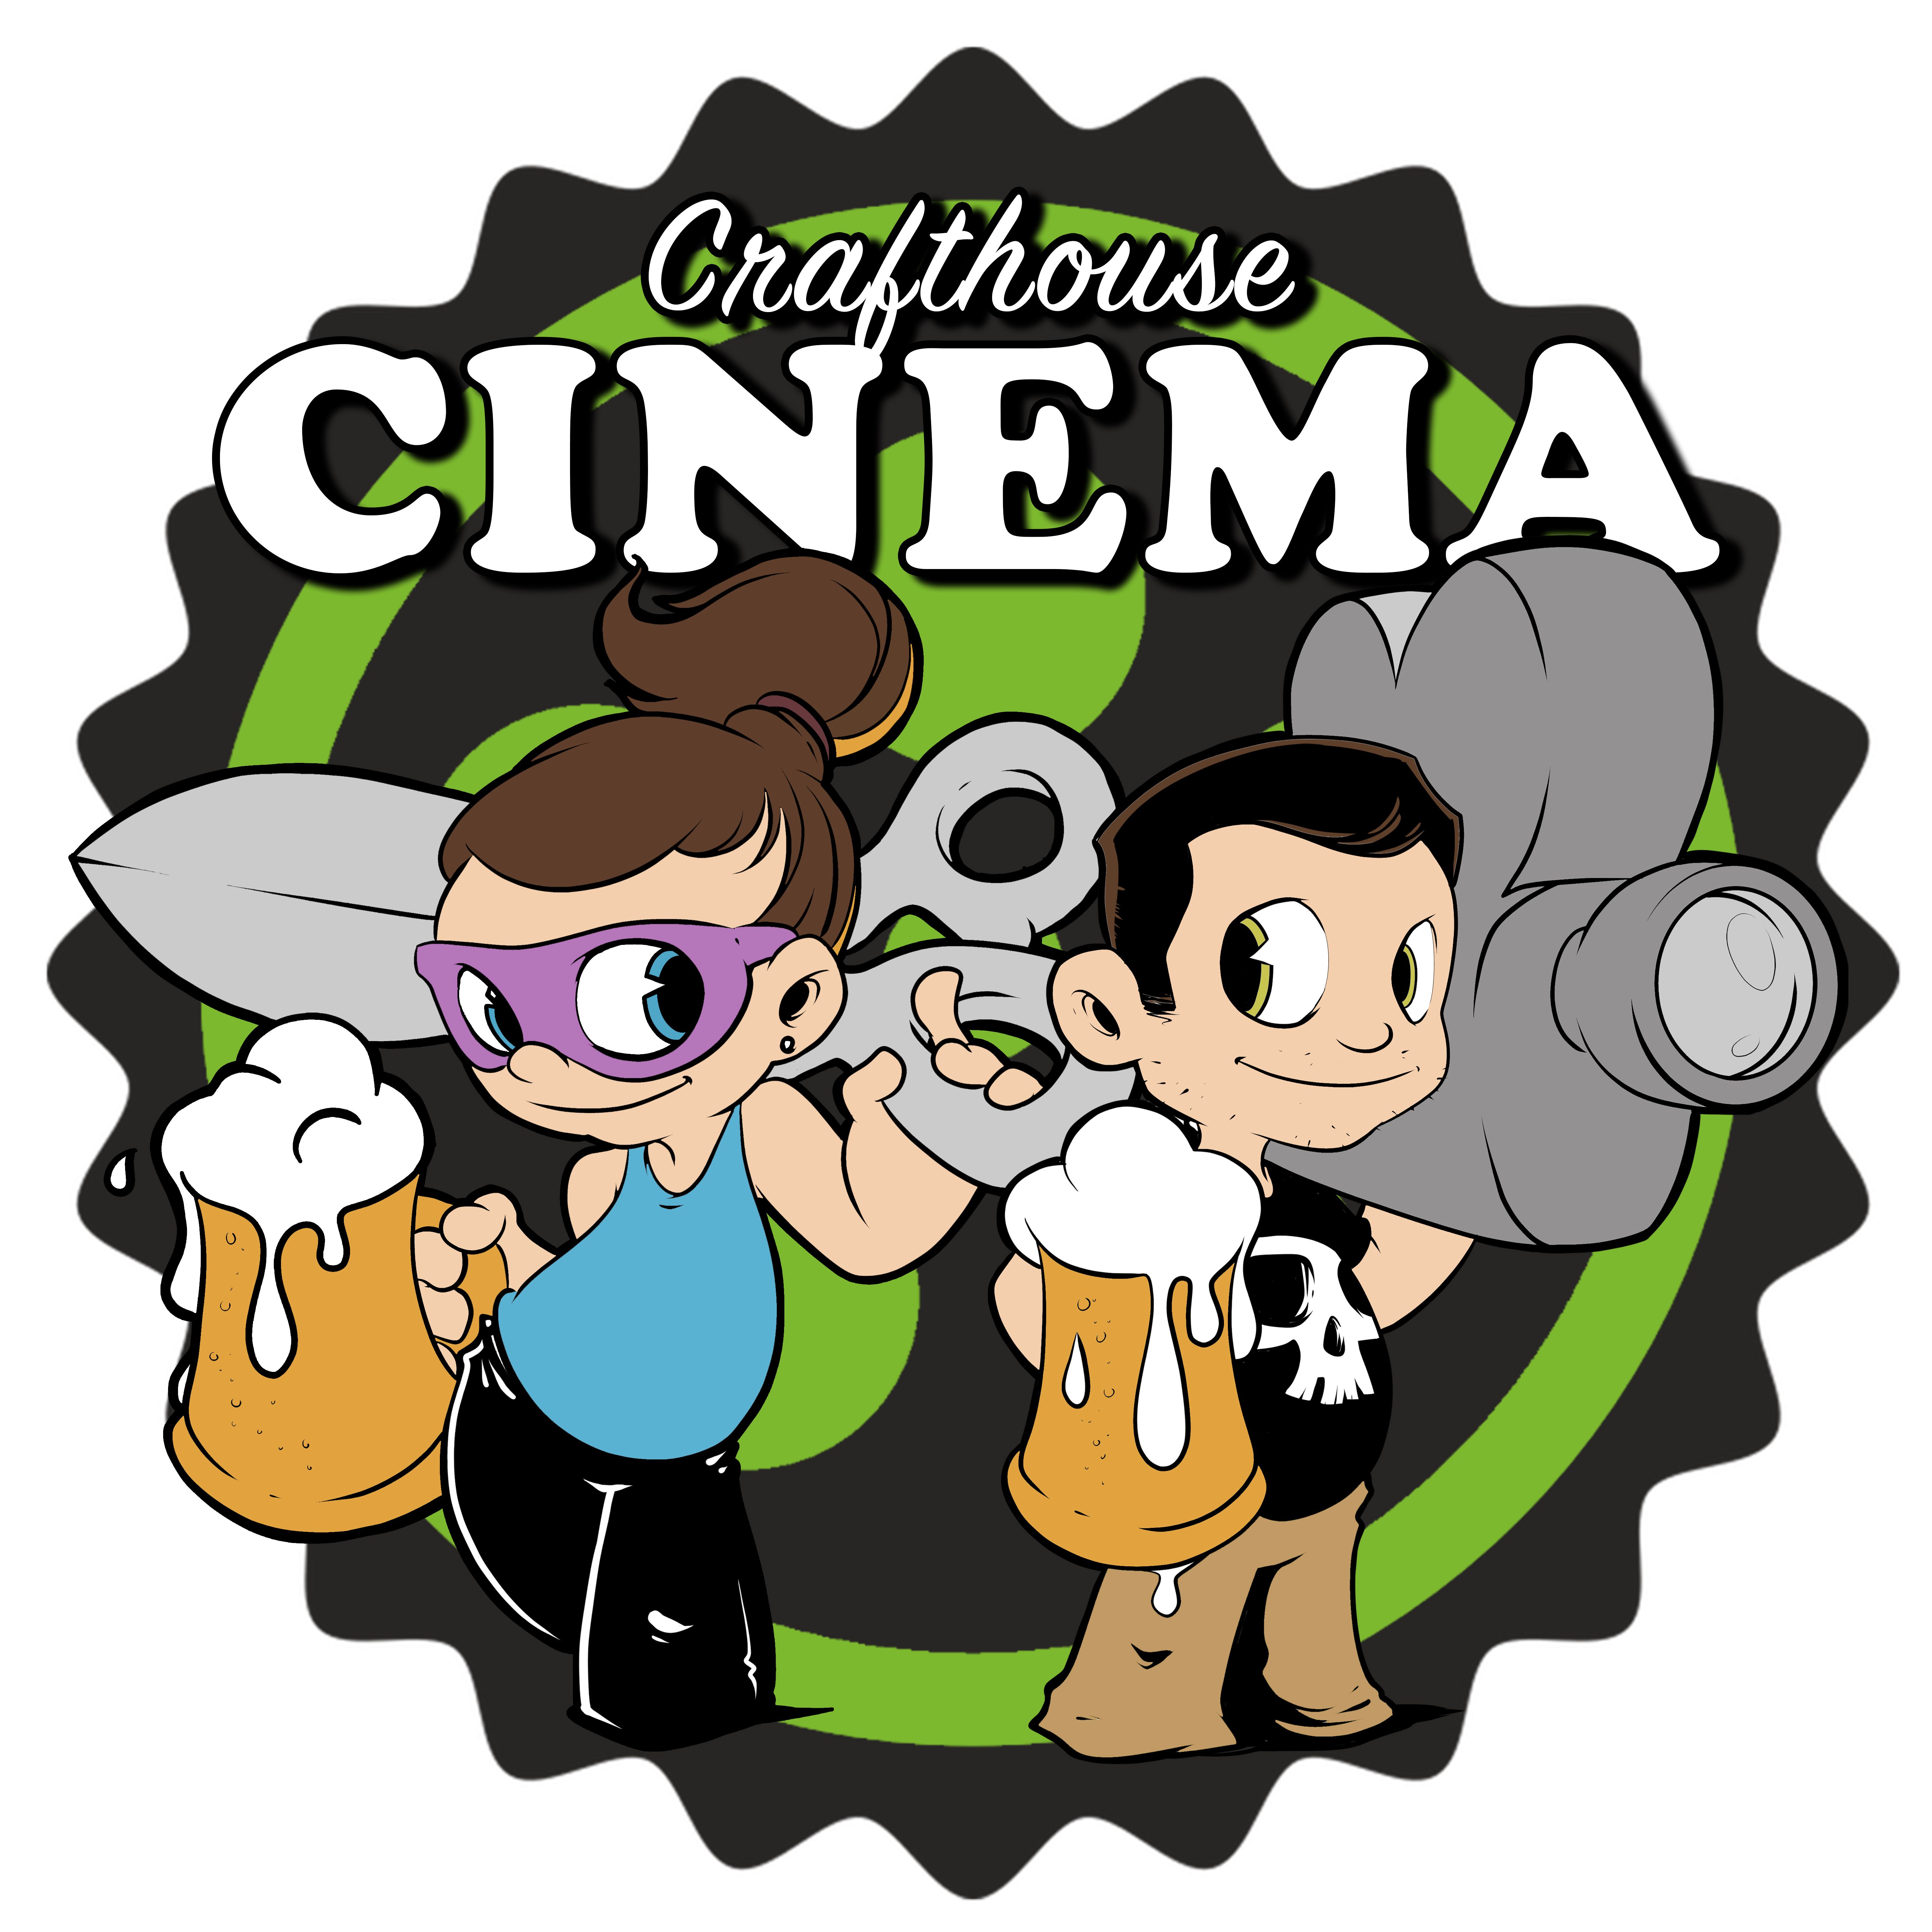 Episode 1: Welcome to the Crafthouse Cinema